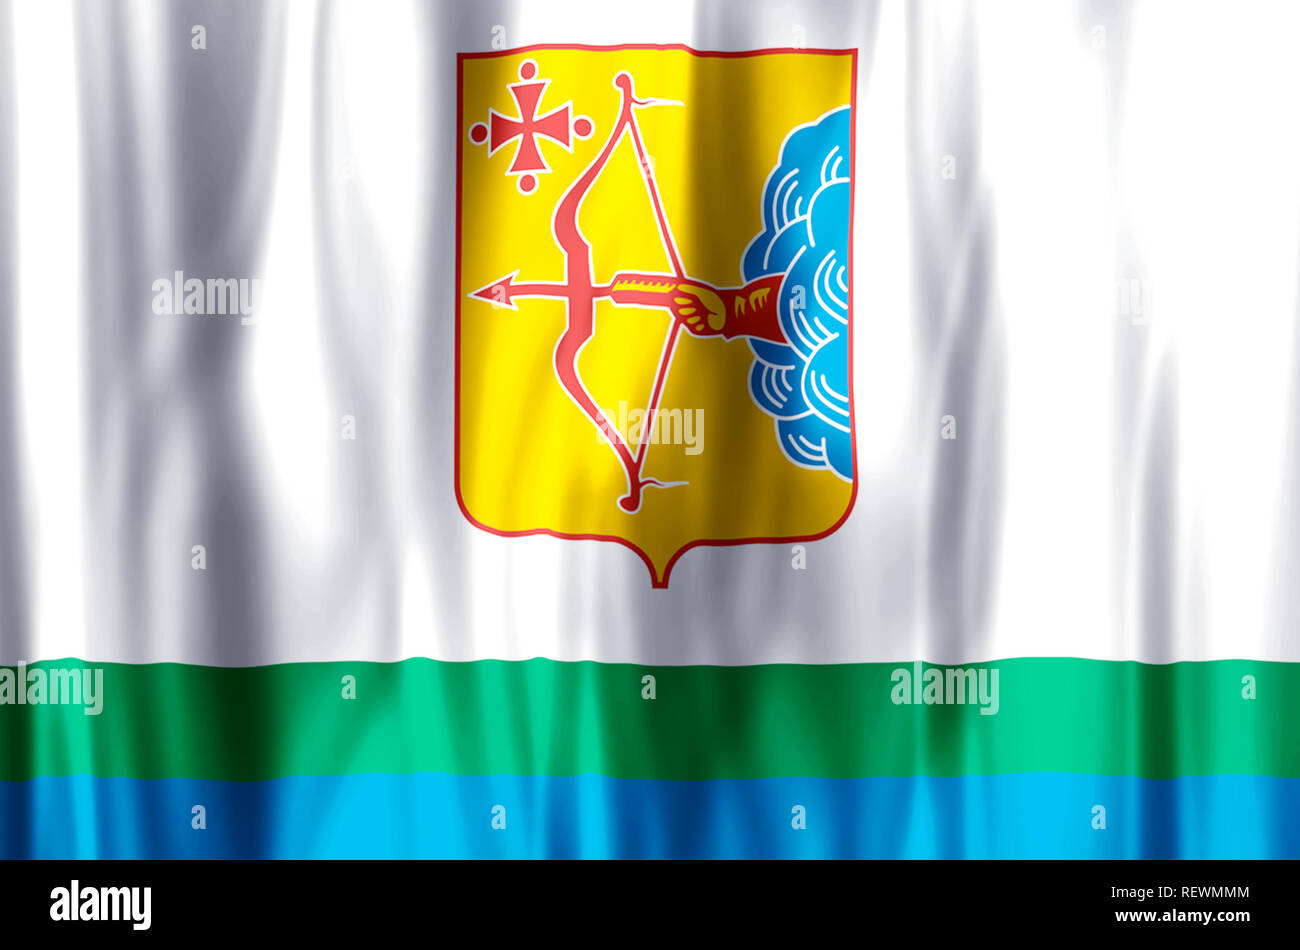 Kirov Stylish Waving And Closeup Flag Illustration Perfect For Background Or Texture Purposes 0225